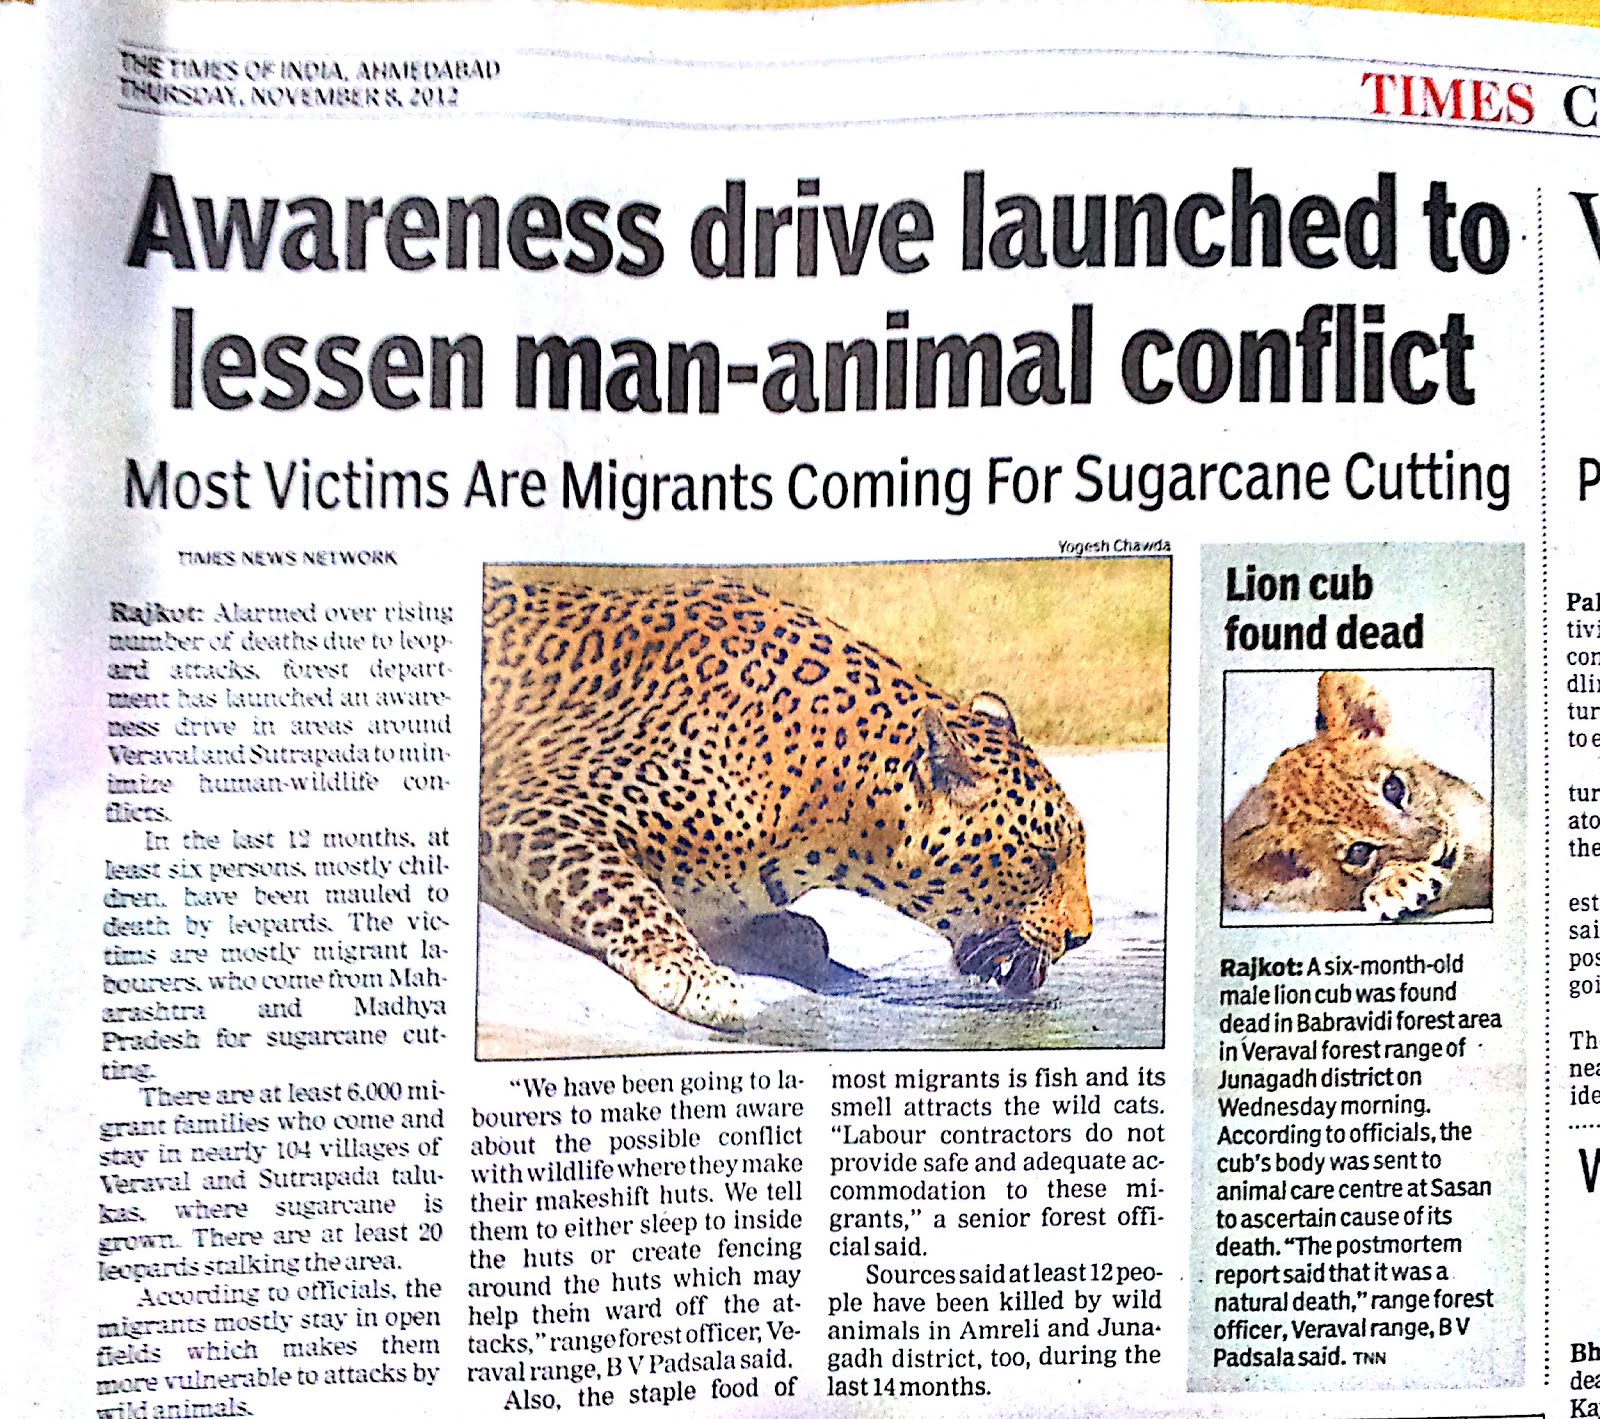 Latest News on Asiatic Lion: Awareness drive launched to lessen man-animal  conflict